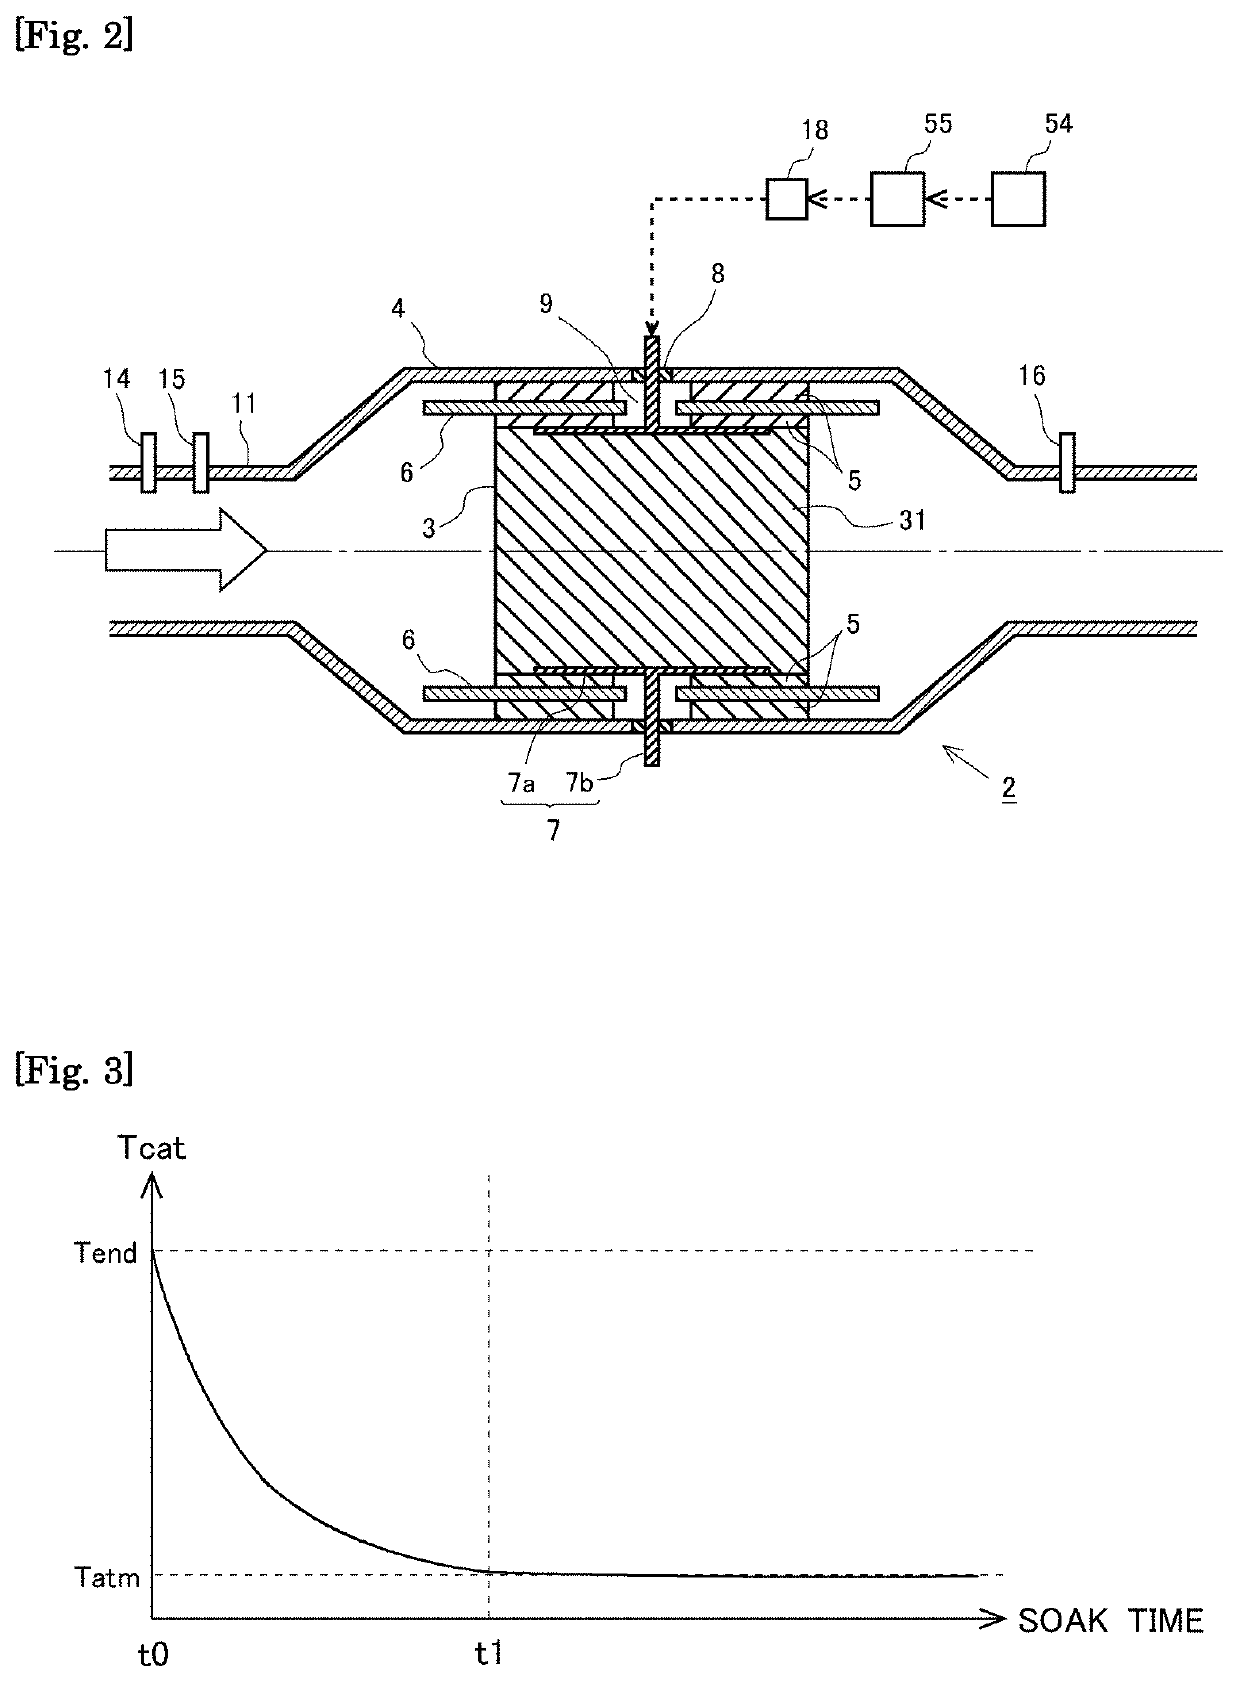 Abnormality detection apparatus for electrically heated catalyst